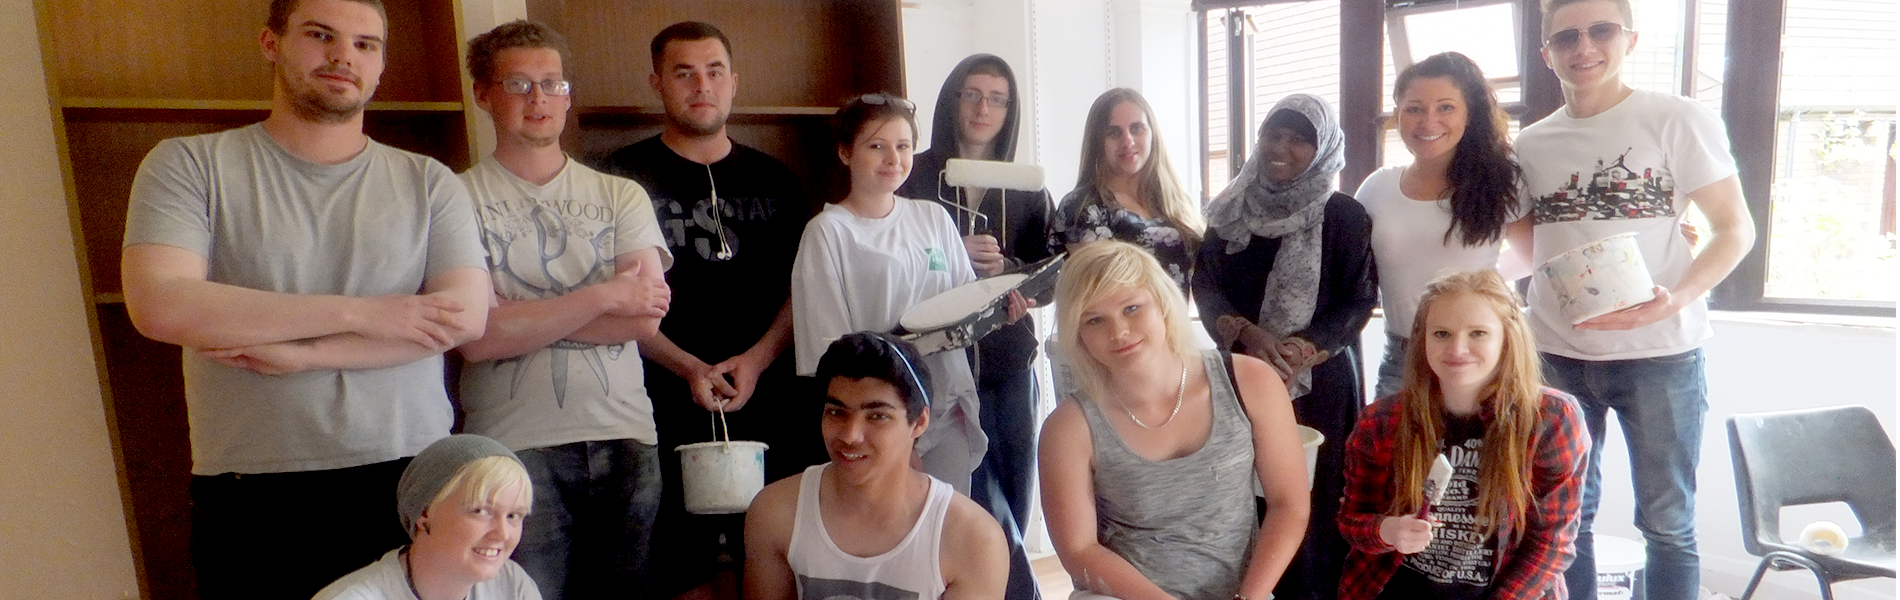 Group of young people with painting equipment.